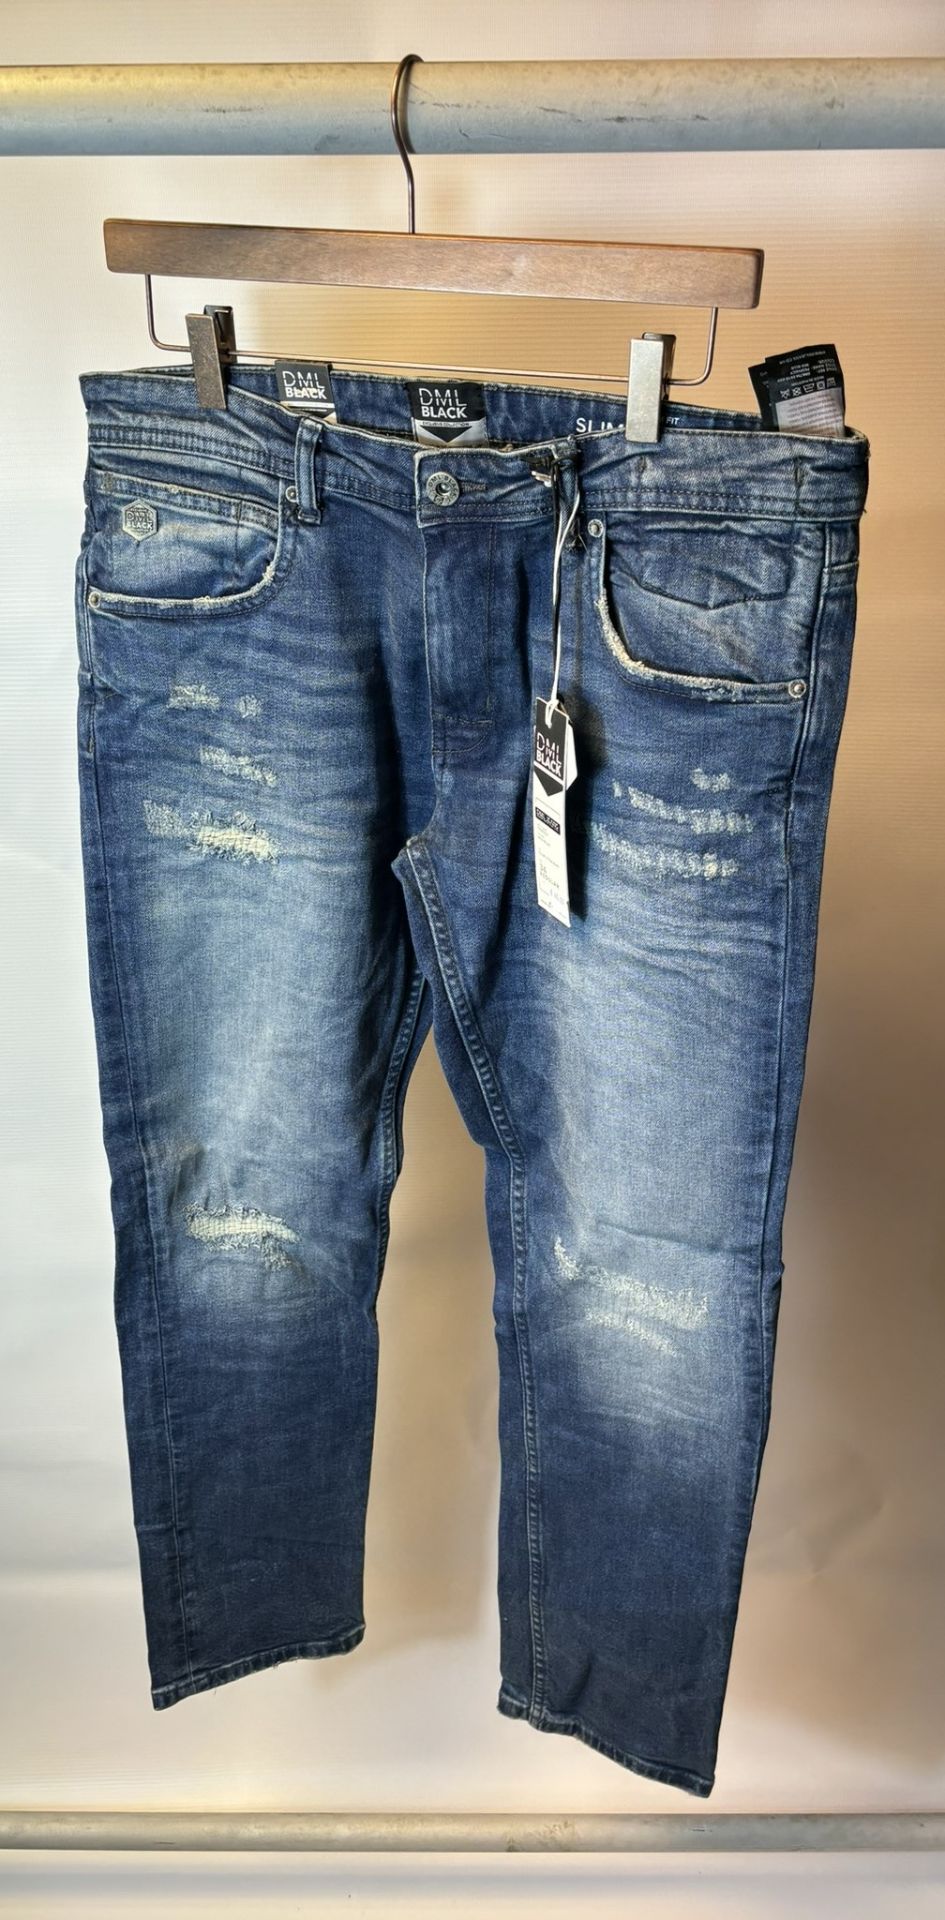 13 x Pairs Of various Sized DML Jeans Prophecy & Voyage Blue Jeans - Image 28 of 39